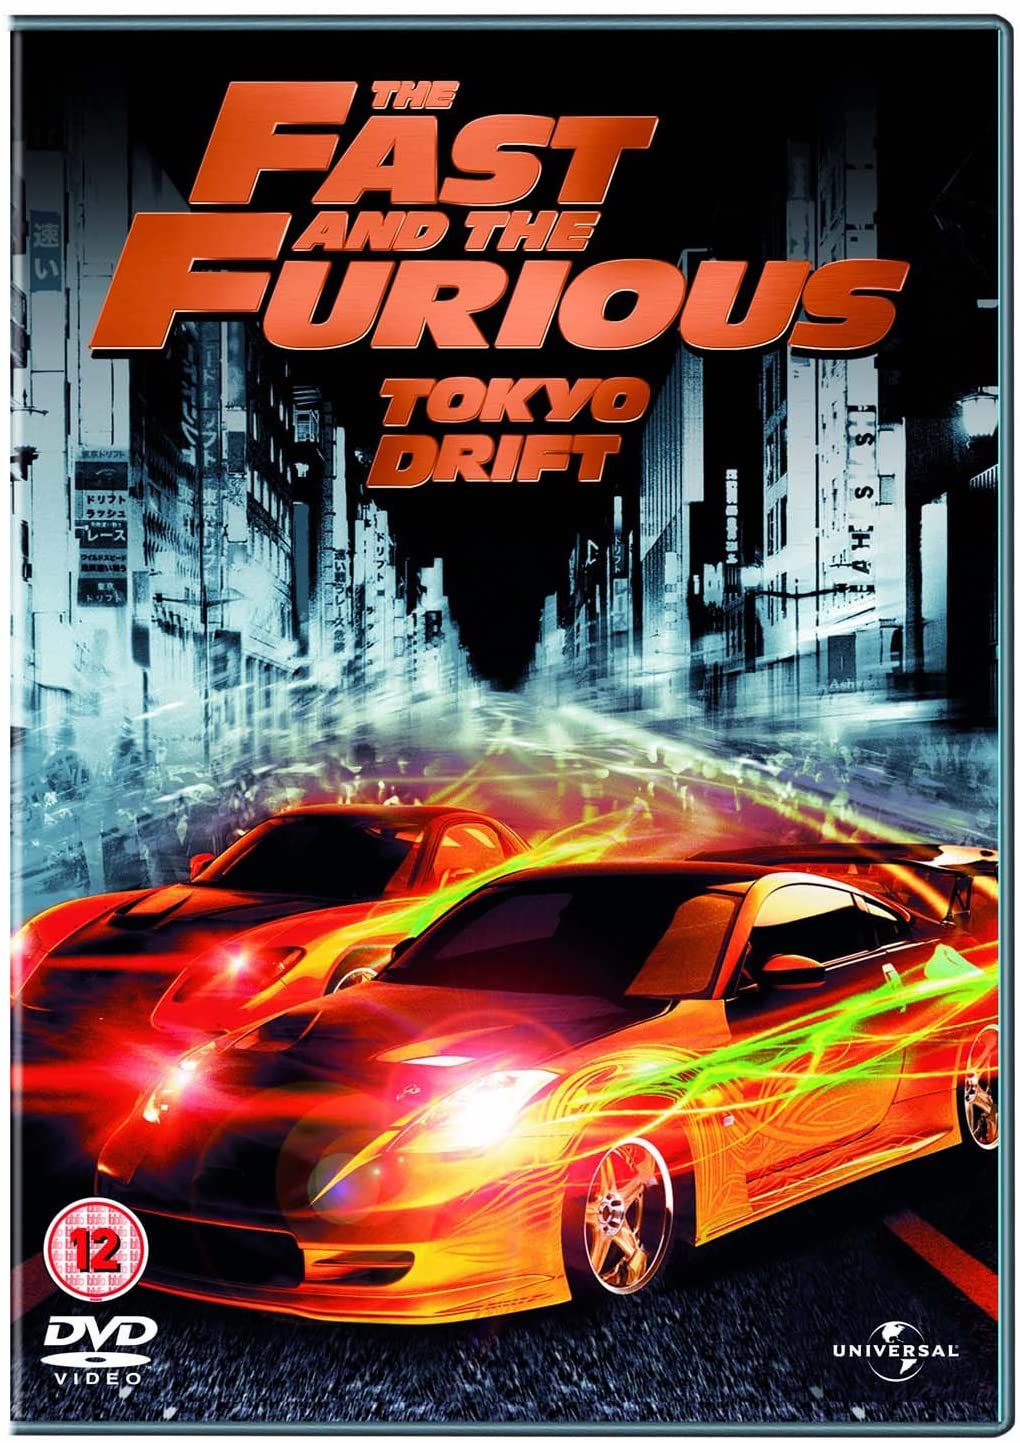 The Fast and the Furious - Tokyo Drift [DVD]